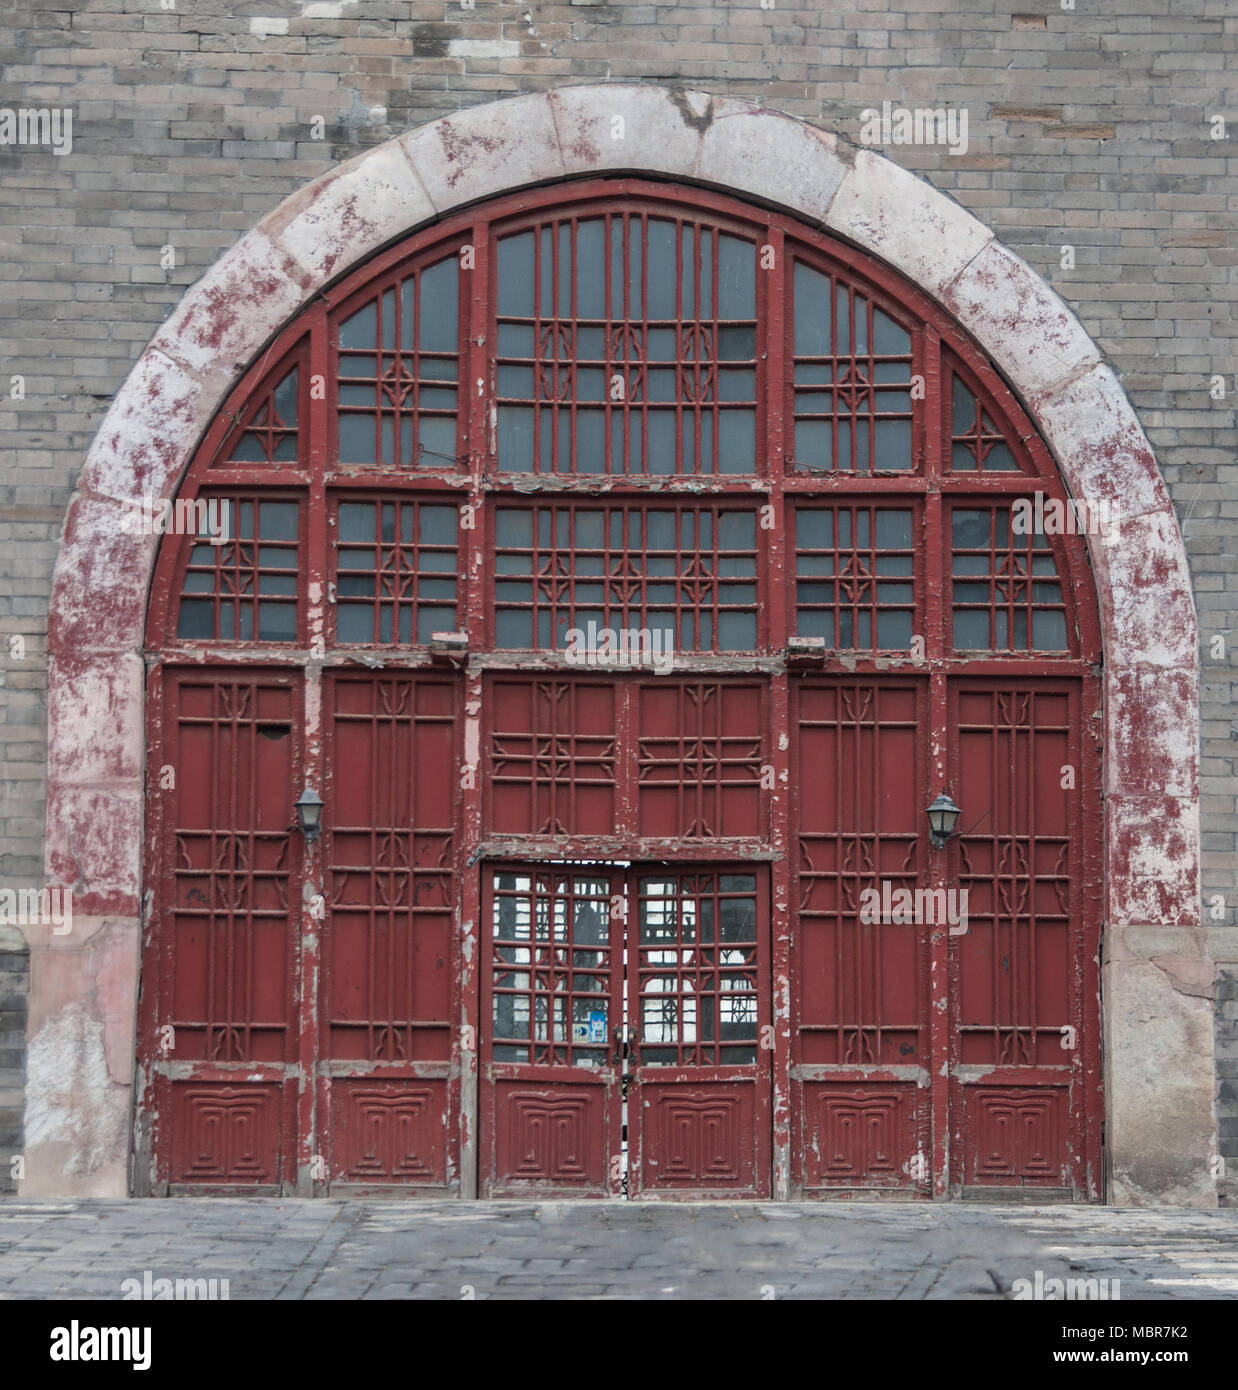 Beijing, China - April 26, 2010: Closeup of large bow-shaped maroon entrance door to under-belly of Bell Tower set in gray stone wall. Stock Photo